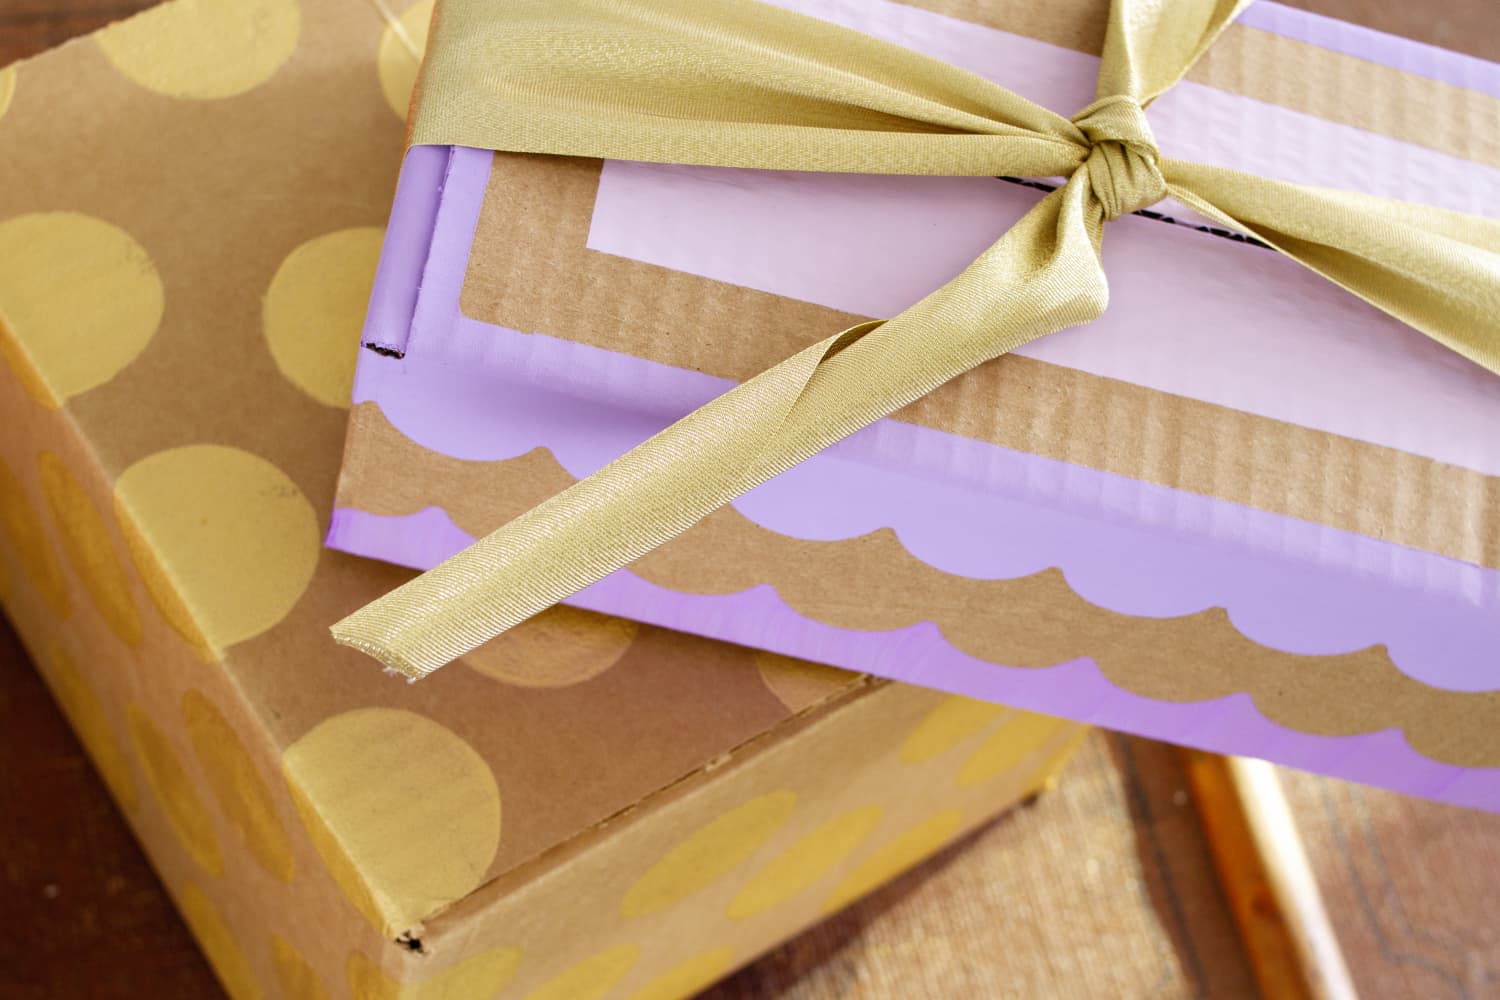 How to Give Gifts in Cardboard Shipping Boxes | Apartment Therapy